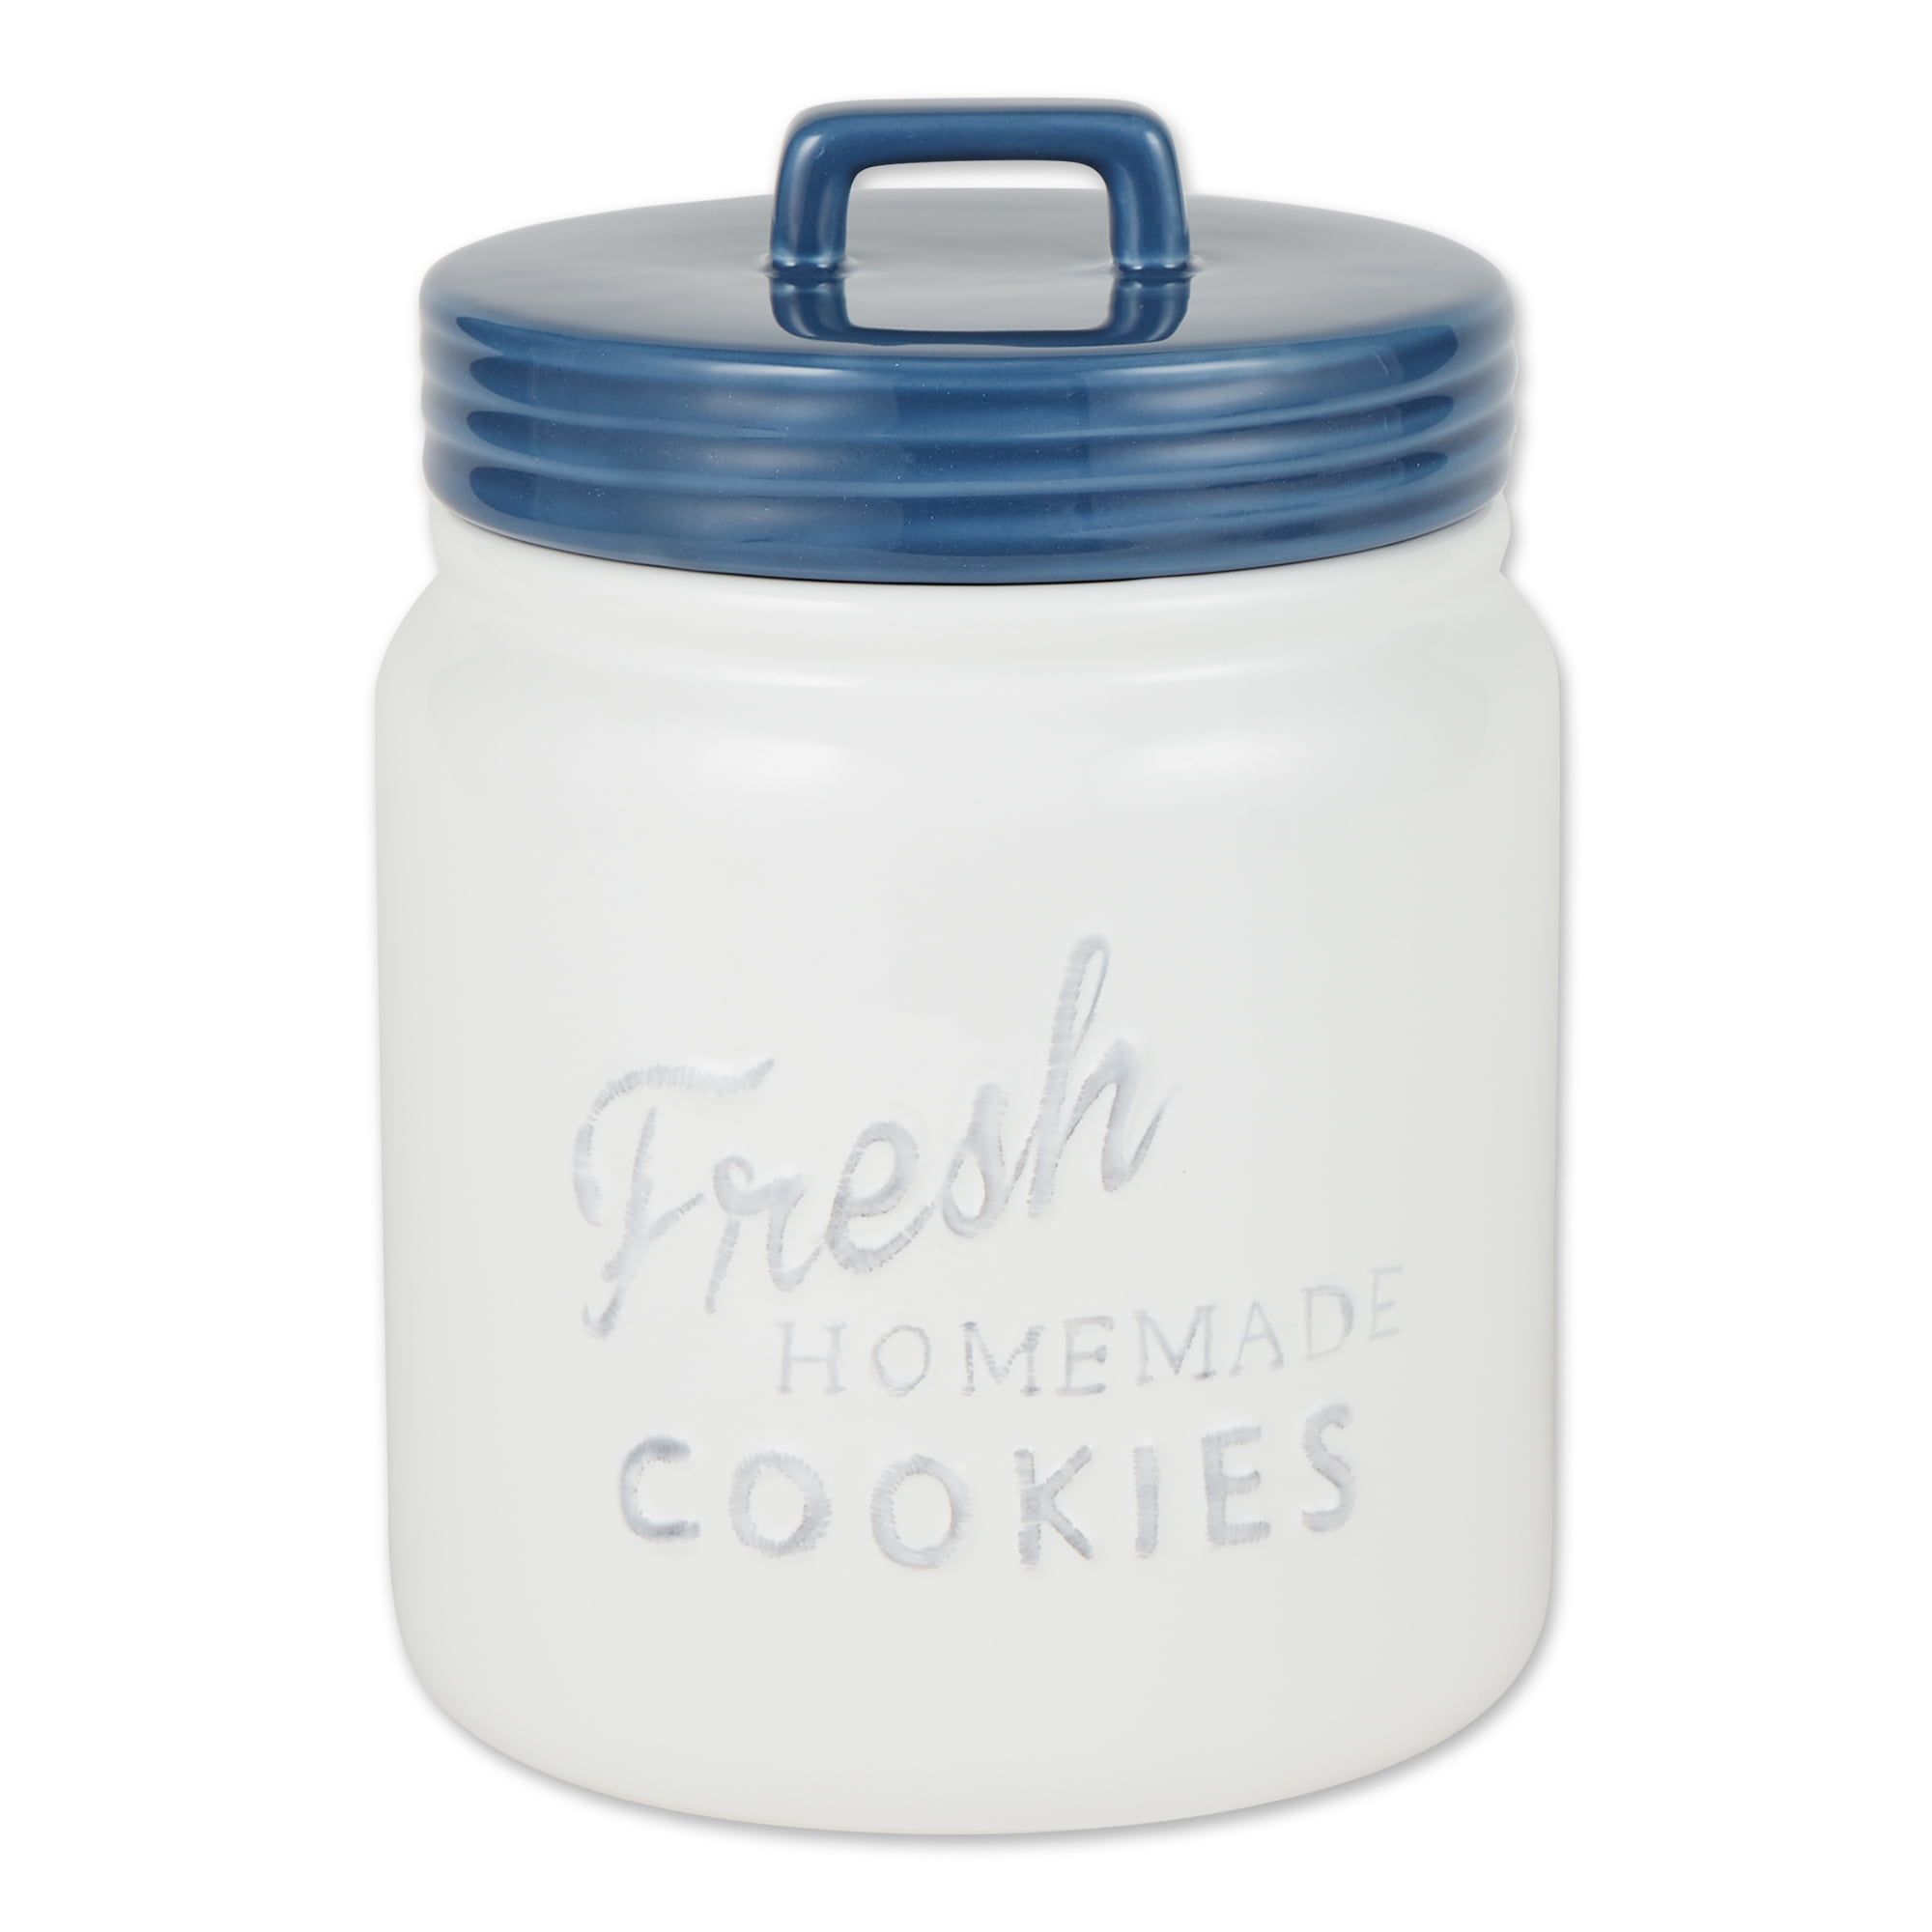 Coca-Cola Small Galvanized Canister Cookie Jar Container 